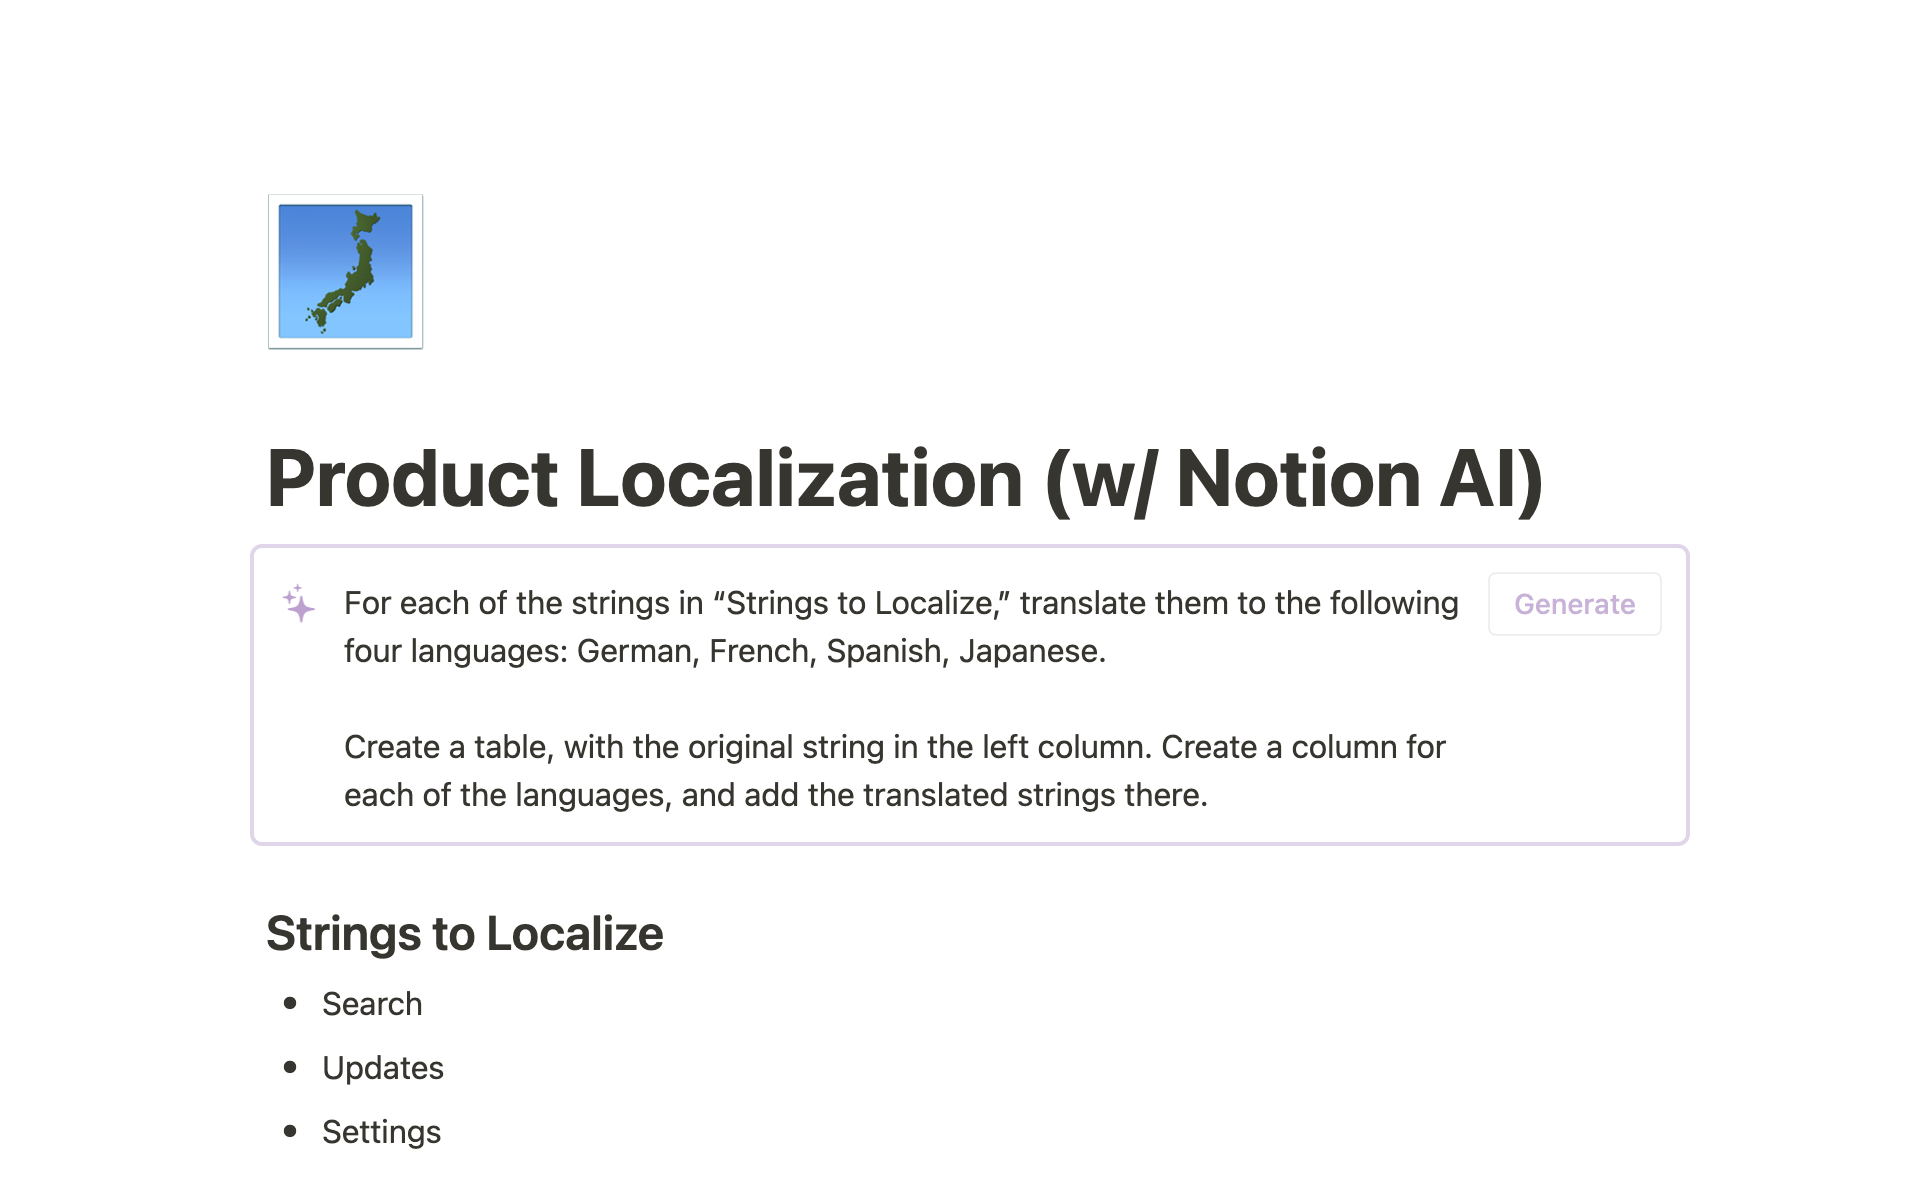 If your team is ready to go global, Notion AI can help. Translate and format any string(s) in a quick and efficient manner. 